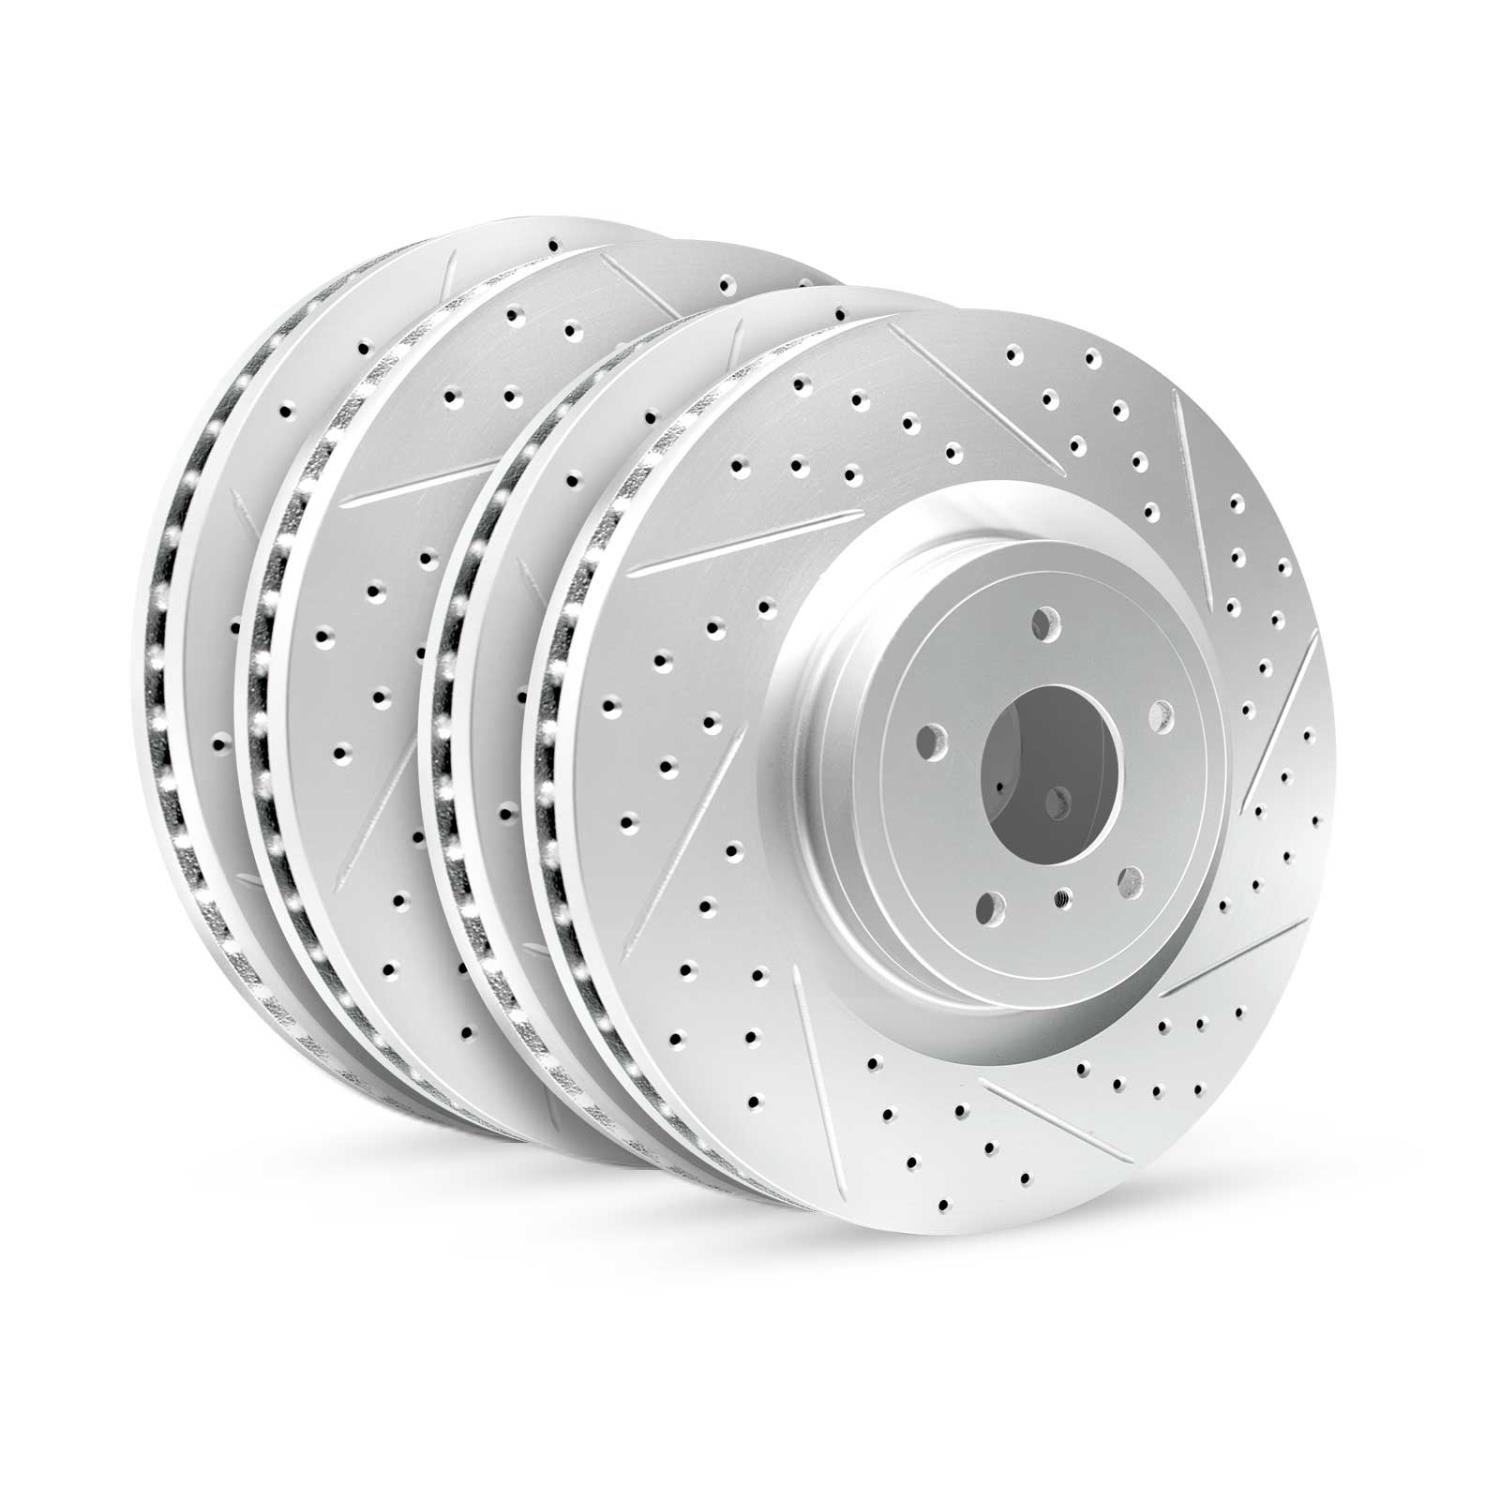 GEO-Carbon Drilled/Slotted Rotors, 2009-2018 Fits Multiple Makes/Models, Position: Front/Rear